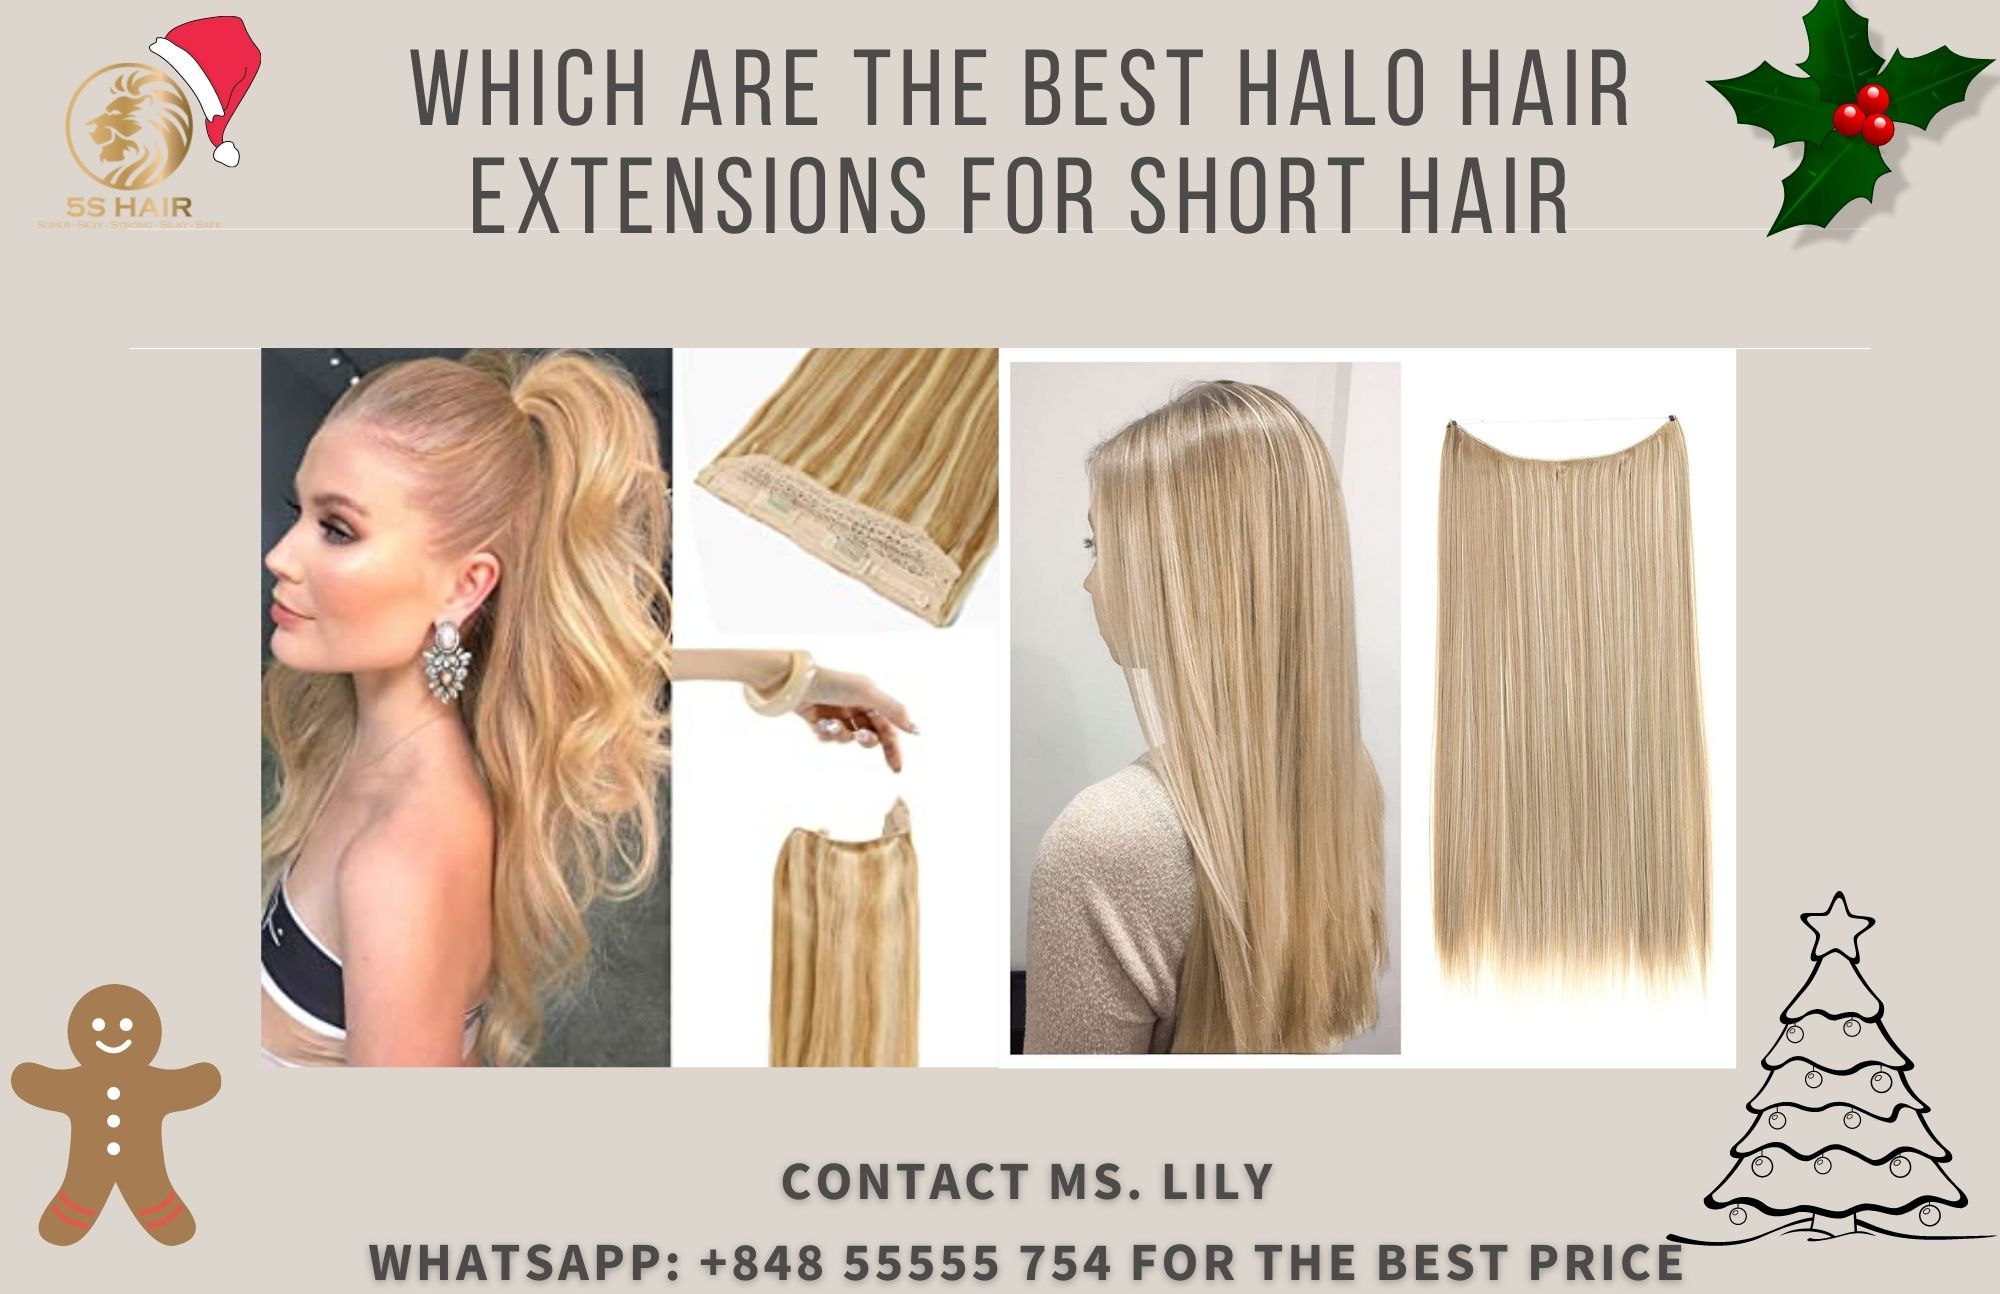 Blue Halo Hair Extensions for Short Hair - wide 2